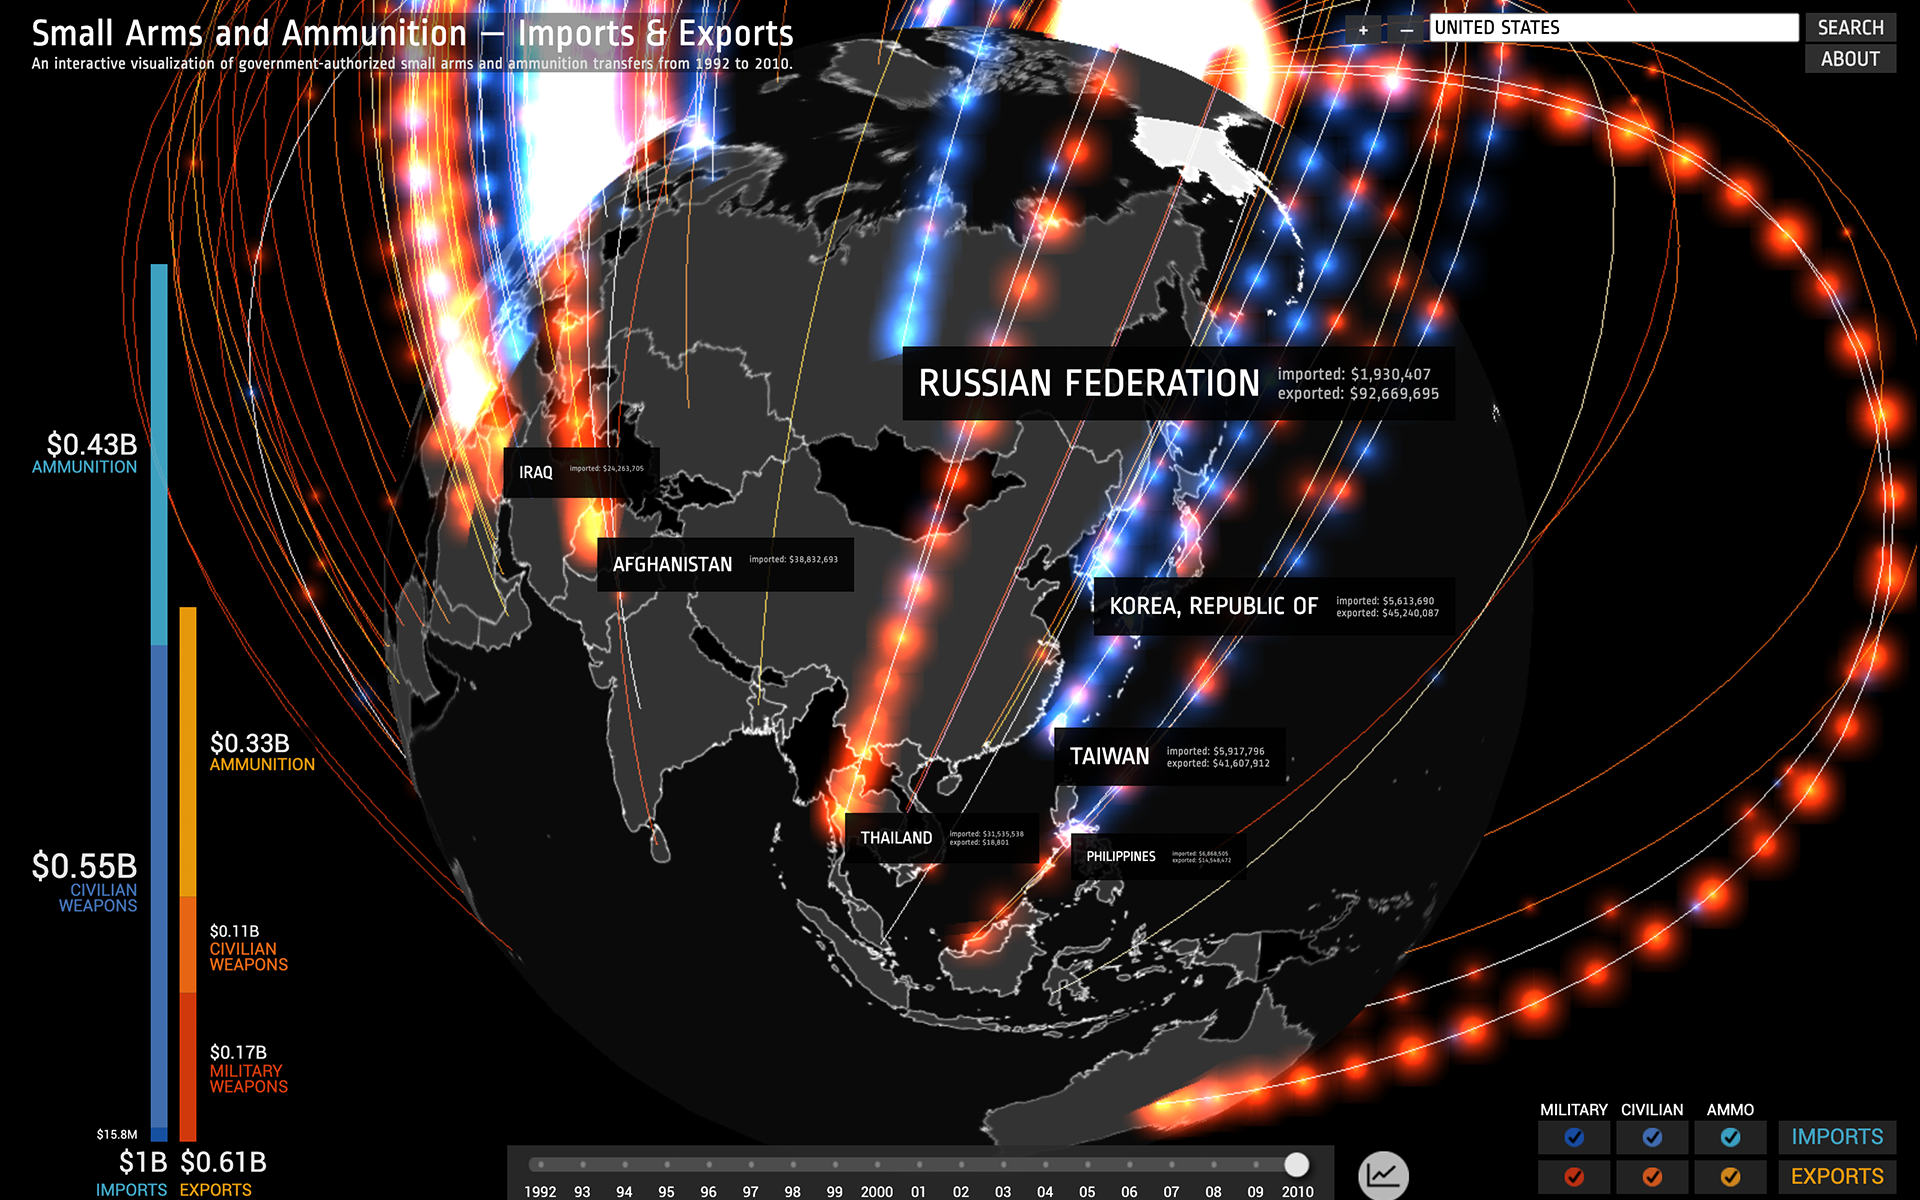 Global Arms Trade Visualization #4